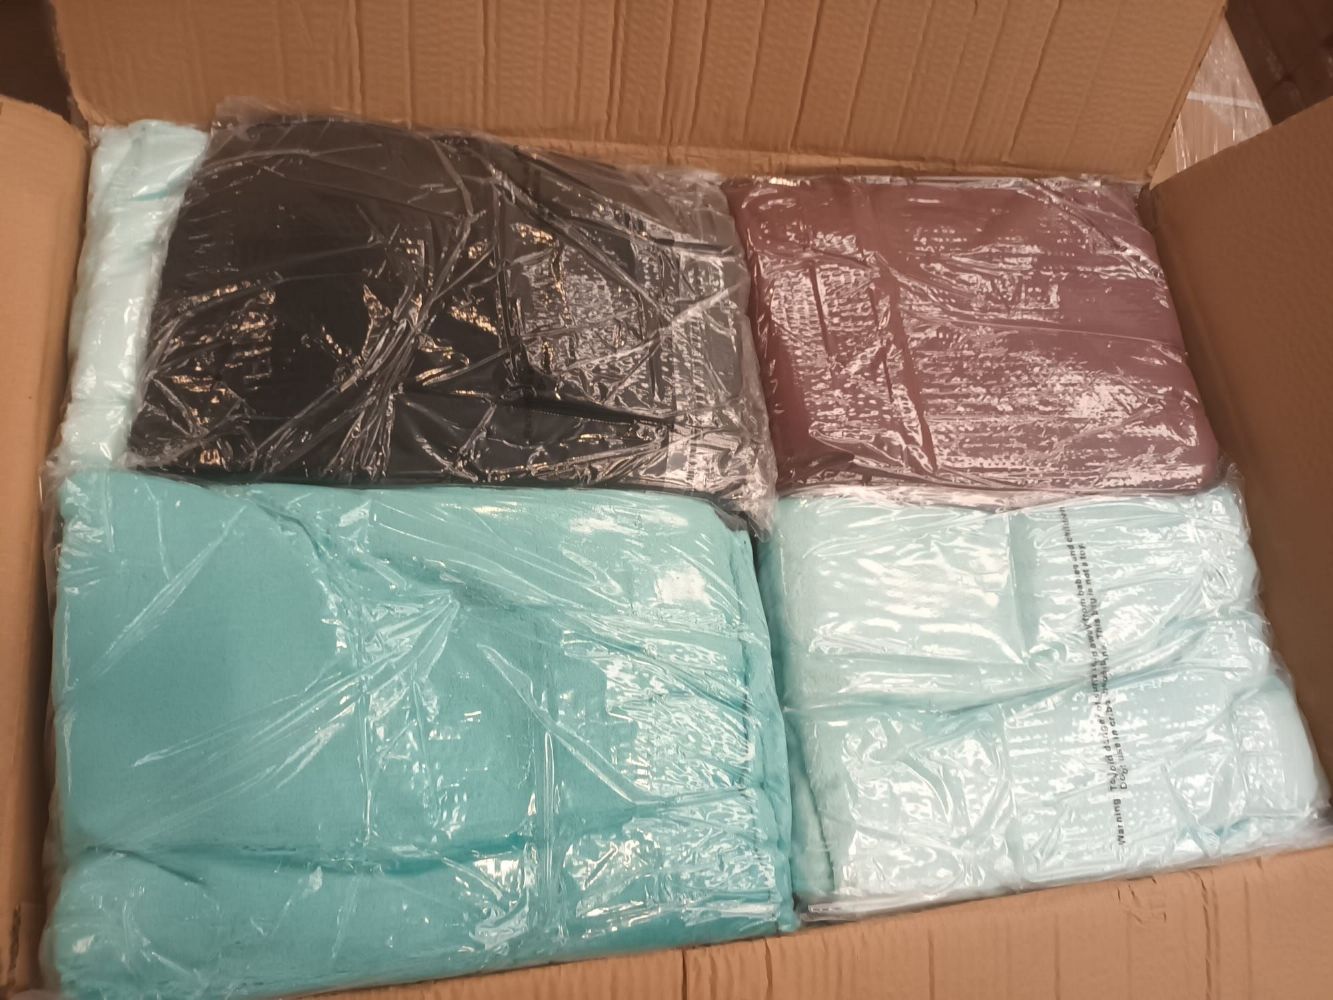 Pallet of Brand New & Packaged Luxury Throws/Blankets - Due to company liquidation - Over £250,000 RRP Value - Delivery Available!